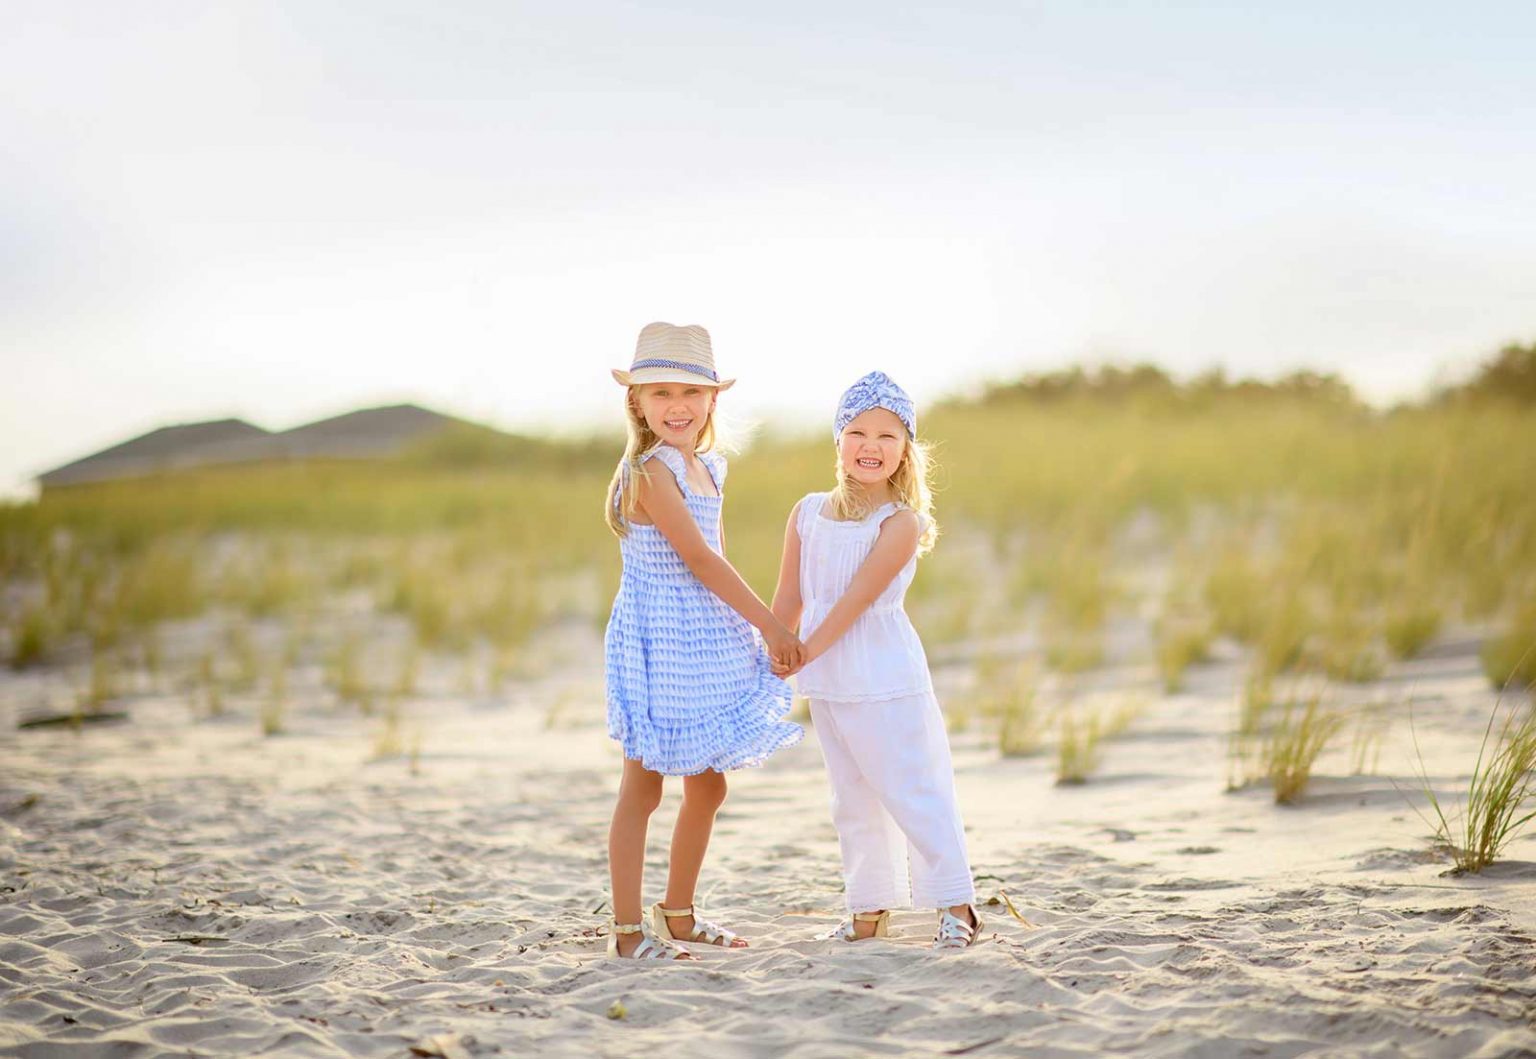 Two young sisters dancing in the sand at a beach in the Hamptons NY